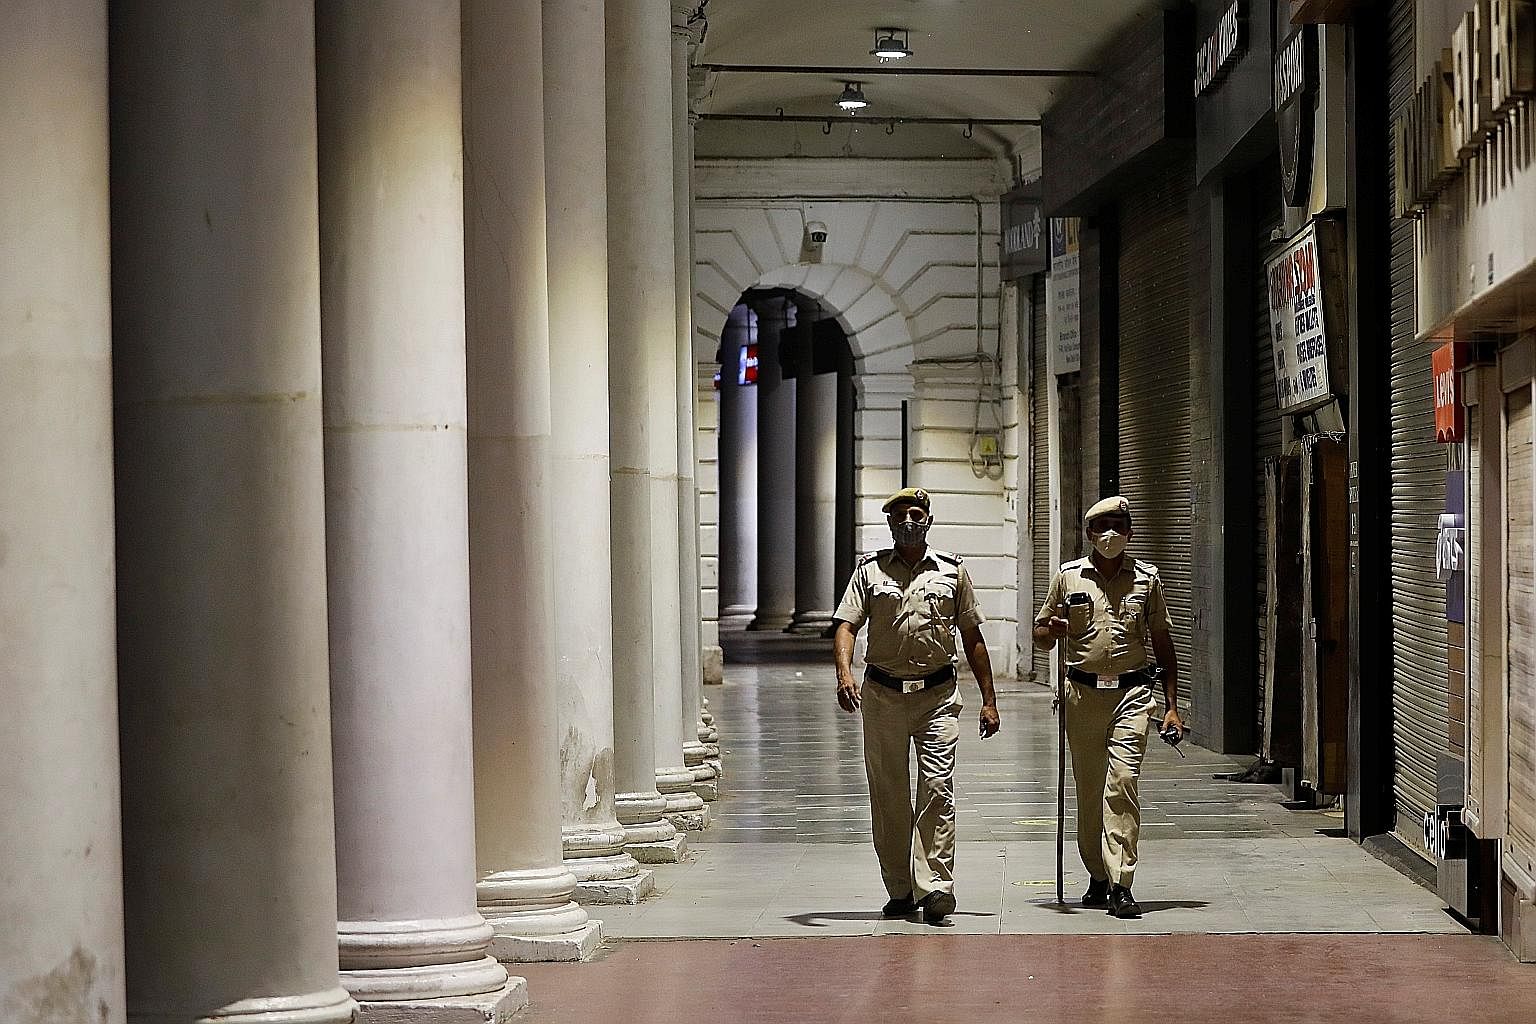 Police patrolling New Delhi's business and financial hub, Connaught Place, yesterday during a curfew. Indian states are imposing new curbs as infections surged to a daily record of 116,000 new Covid-19 cases. Press reports said hospitals were hit, es